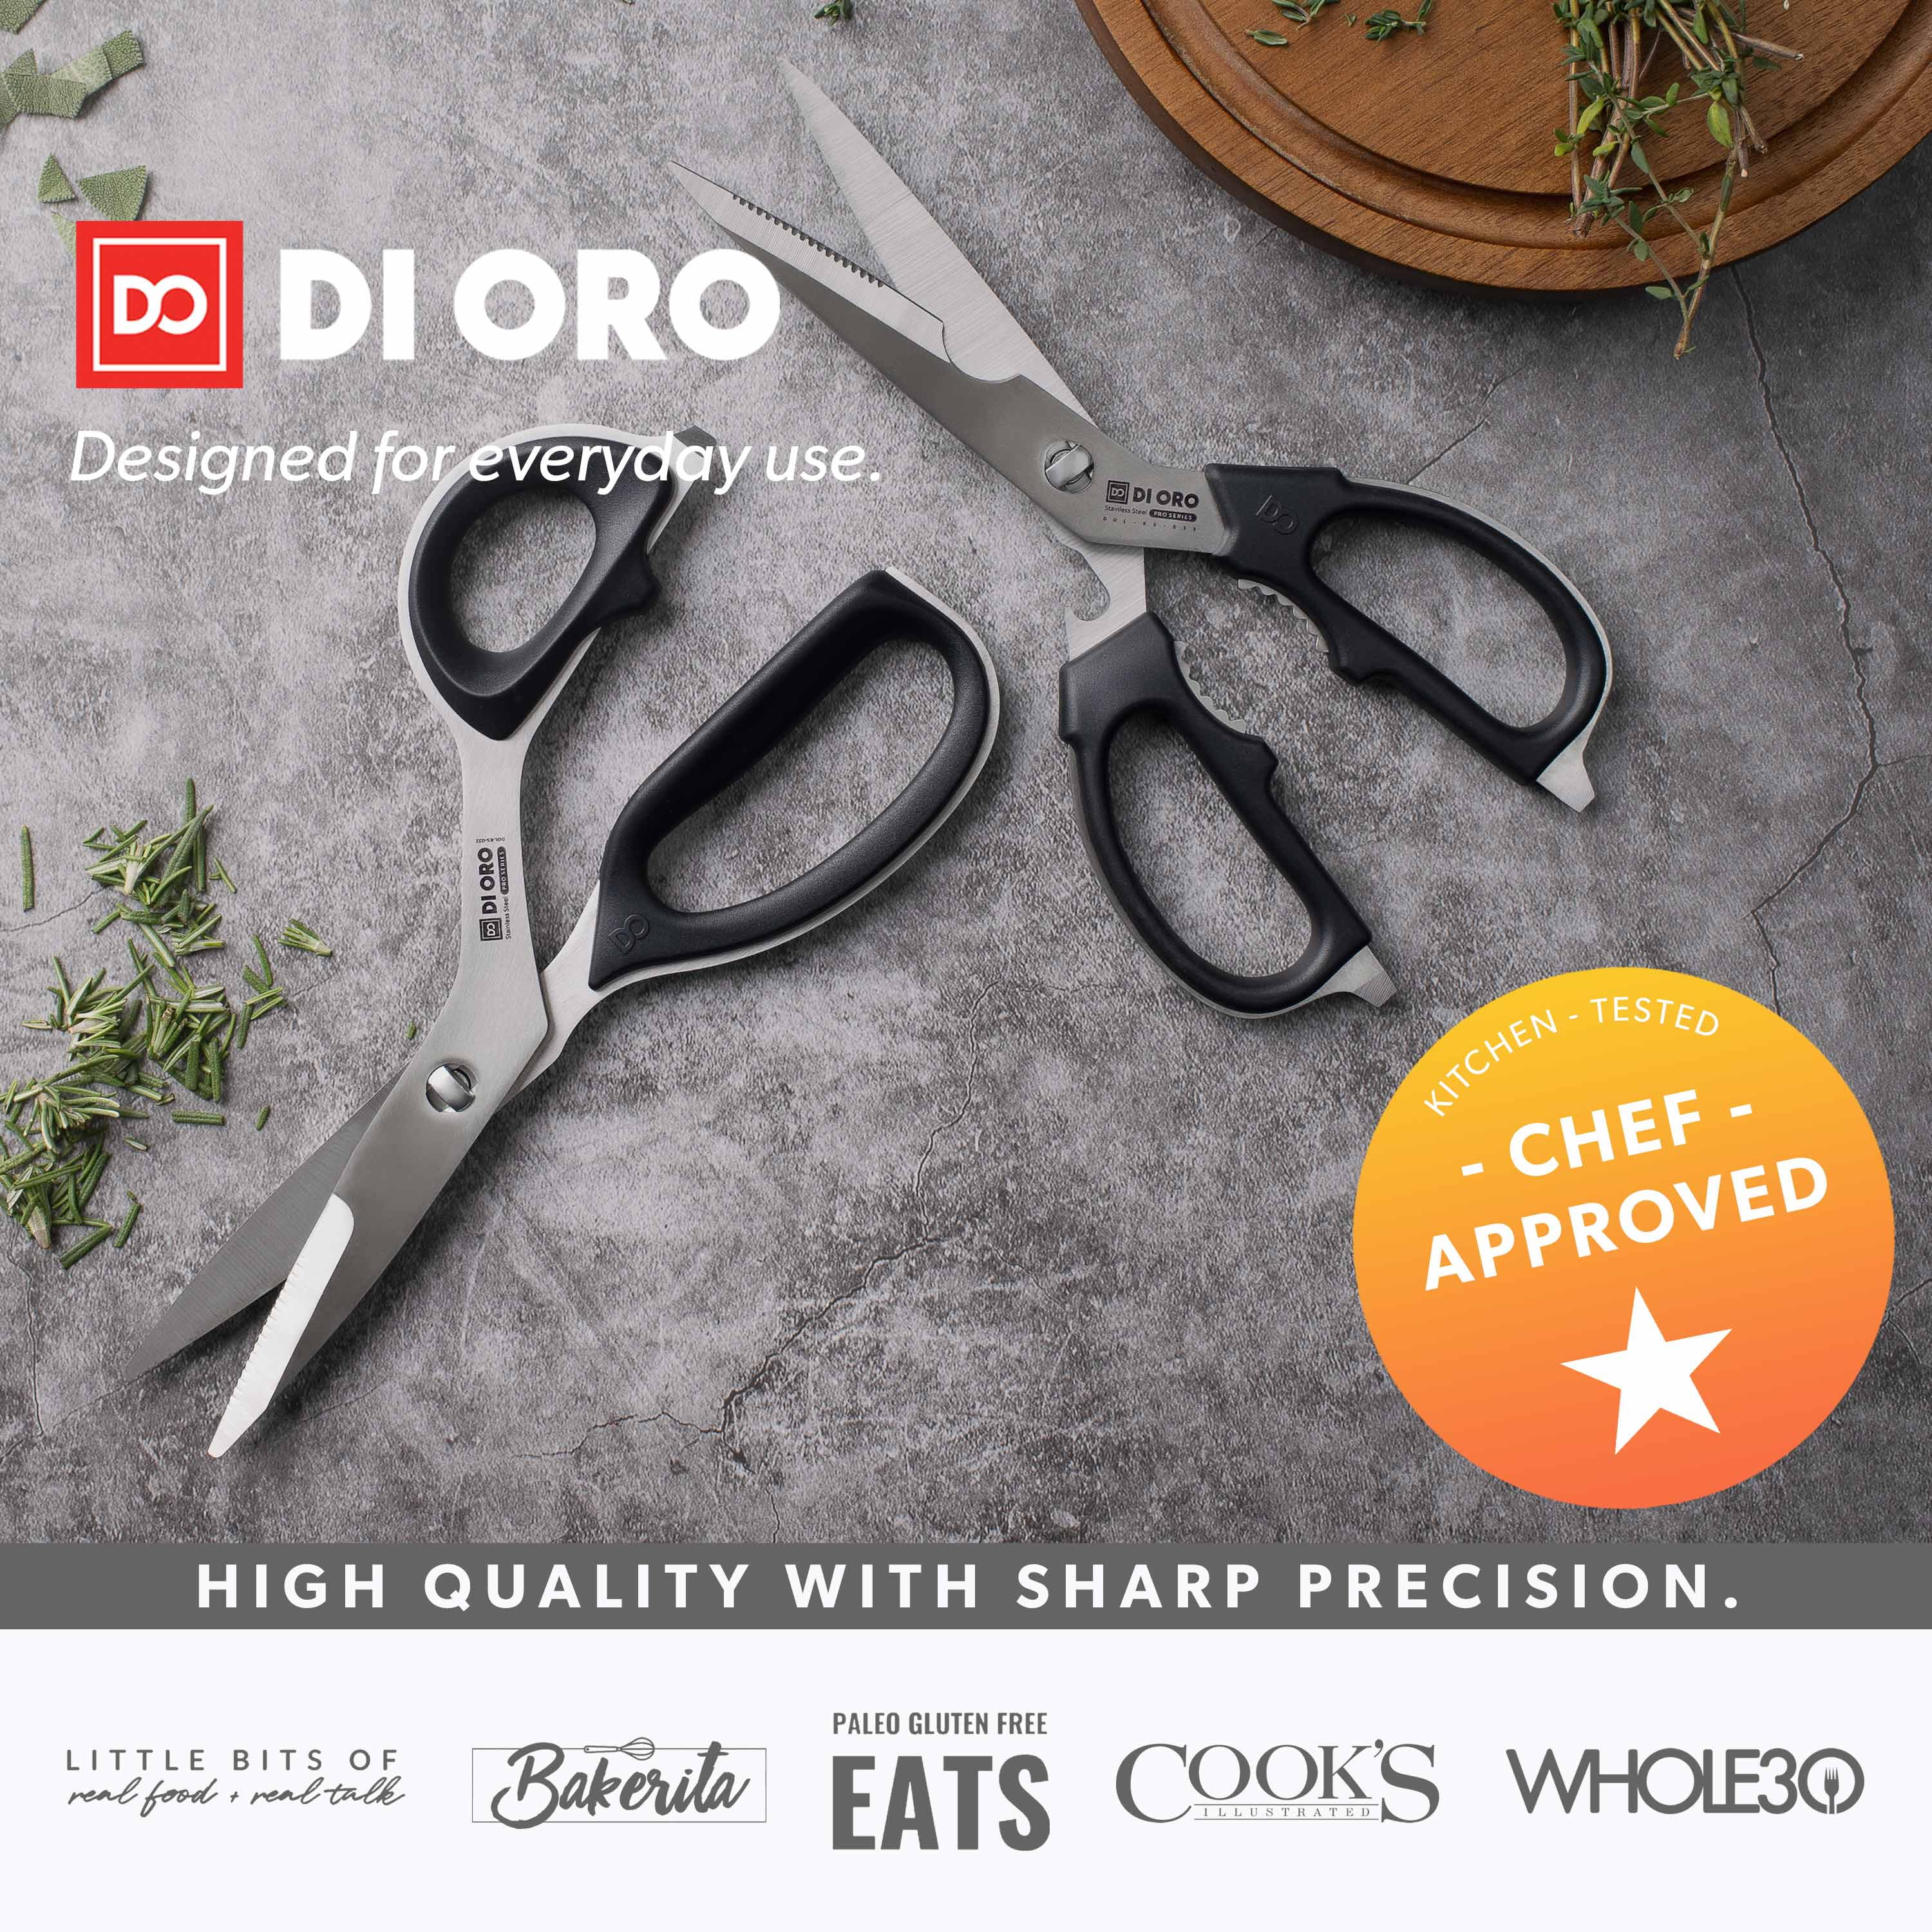 DI ORO Kitchen Scissors Heavy Duty Dishwasher Safe - Kitchen Scissors for  Food, Meat, & Poultry - Stainless Steel Kitchen Shears that Come Apart 